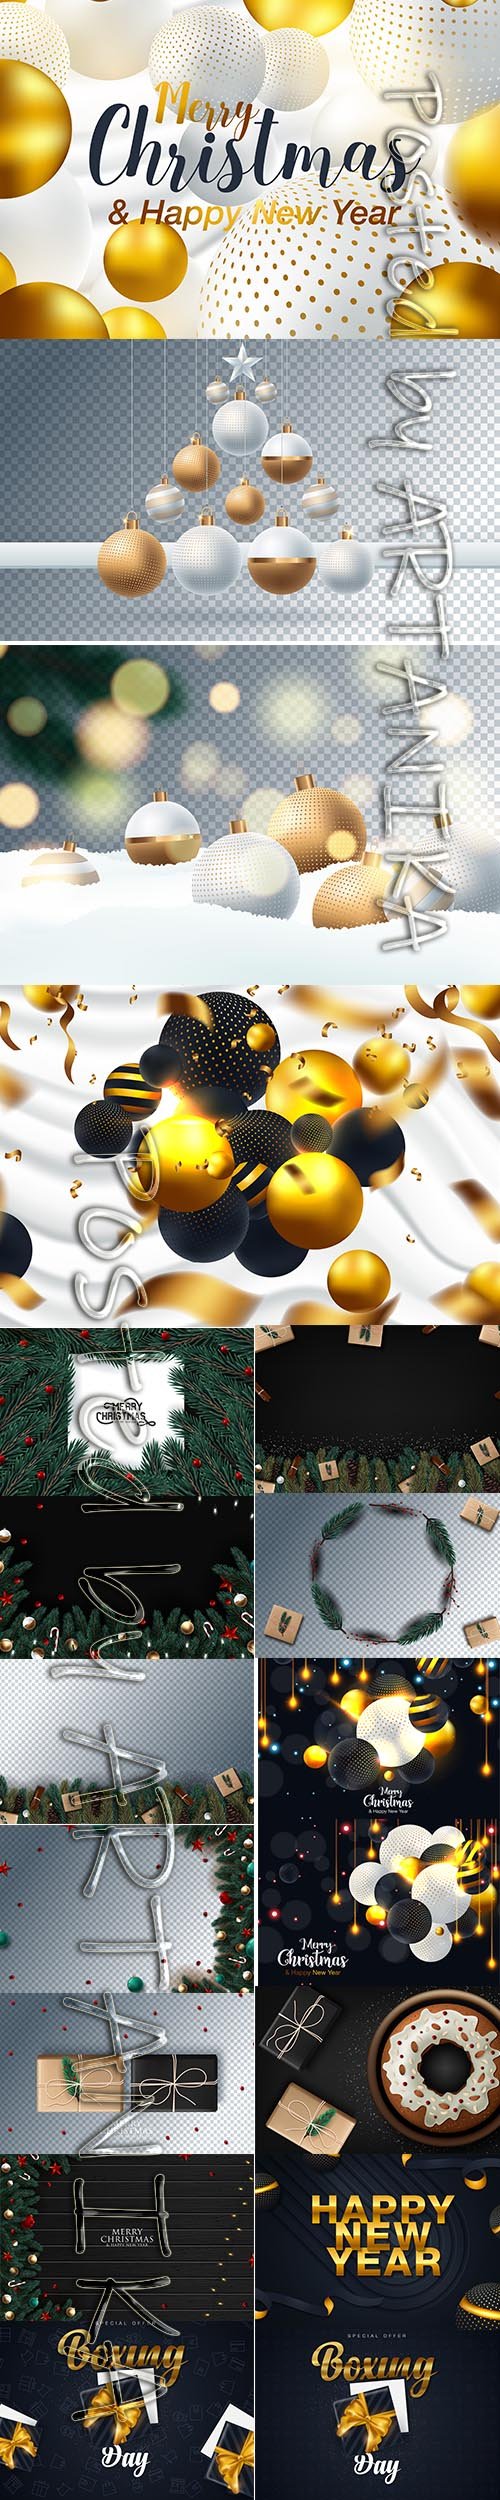 Collection of Xmas and New Year 2020 Backgrounds